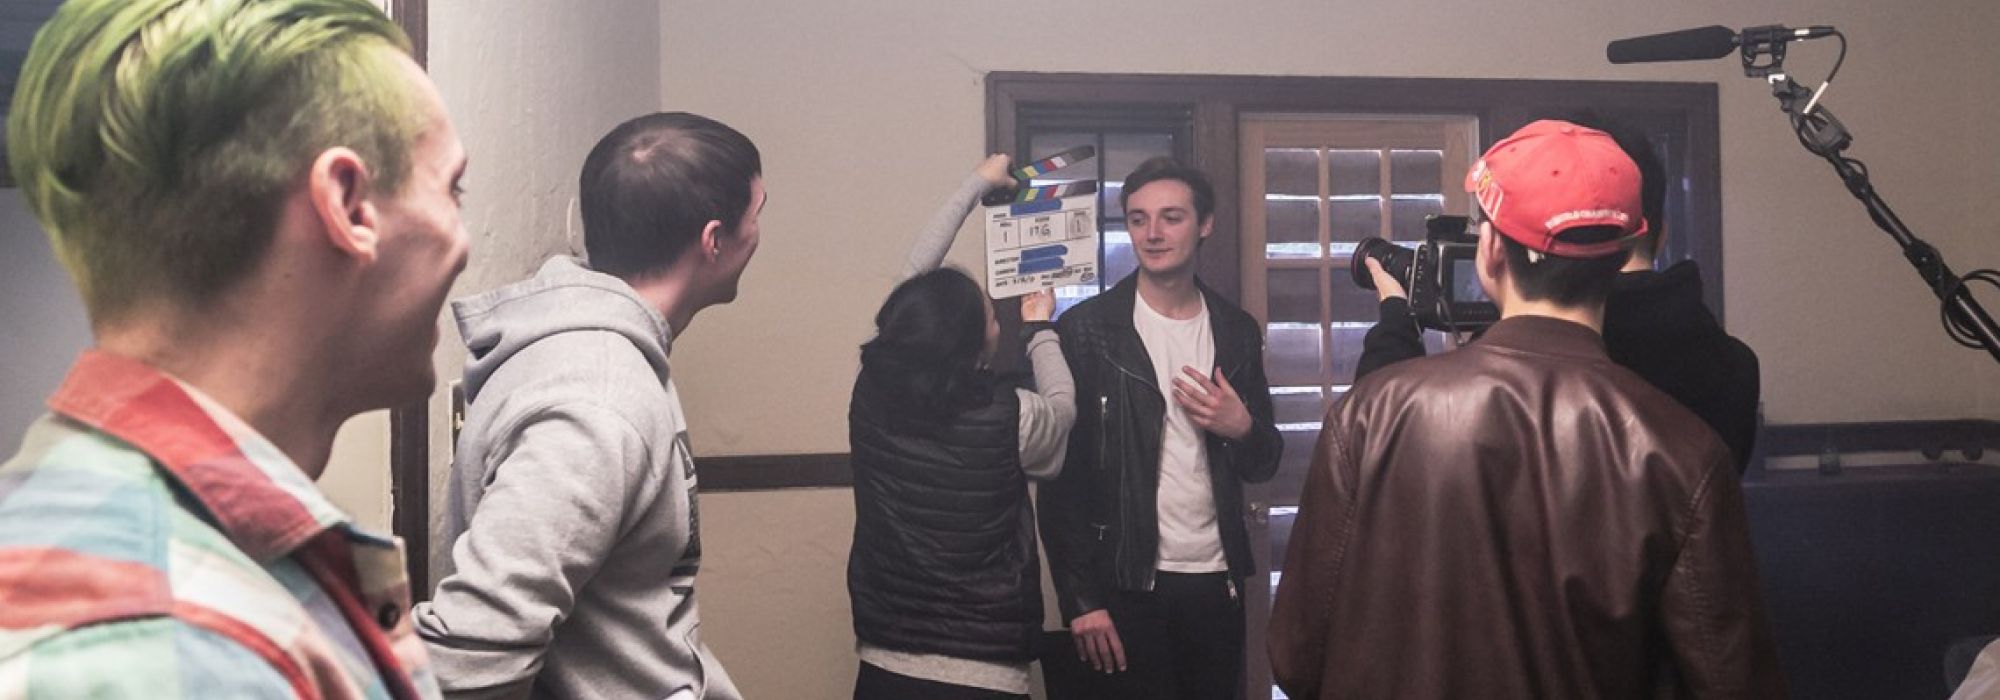 Six students on set of a film shoot. The focus is a student in white t-shirt and leather jacket who prepares to start acting as a producer stands in front of them with a clapperboard.